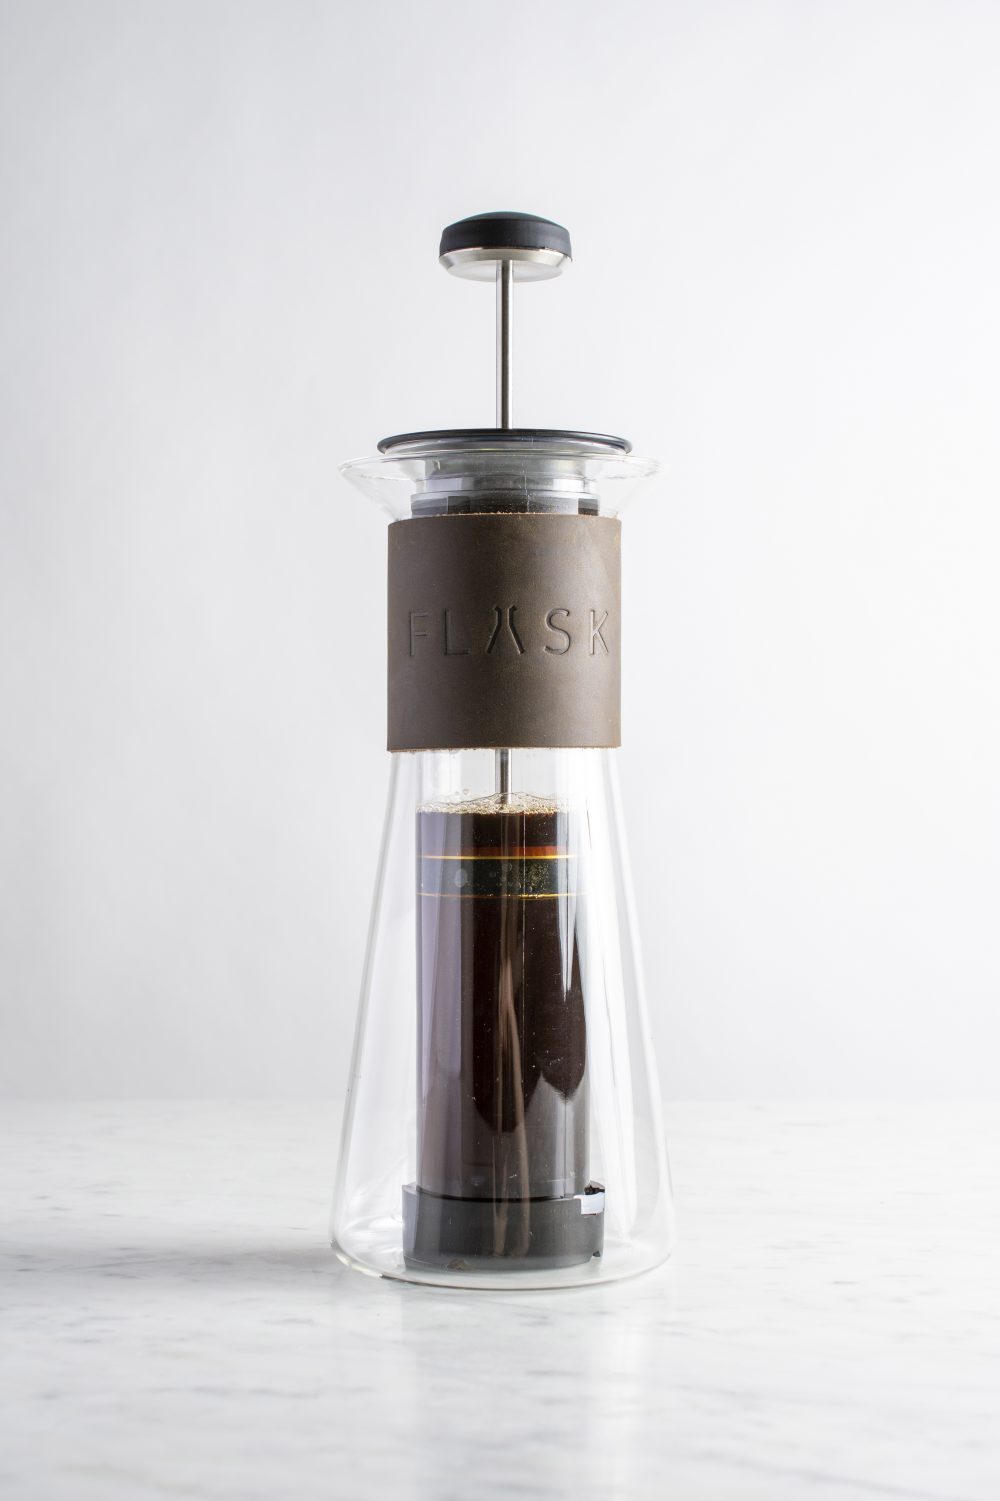 A reinvented French press.